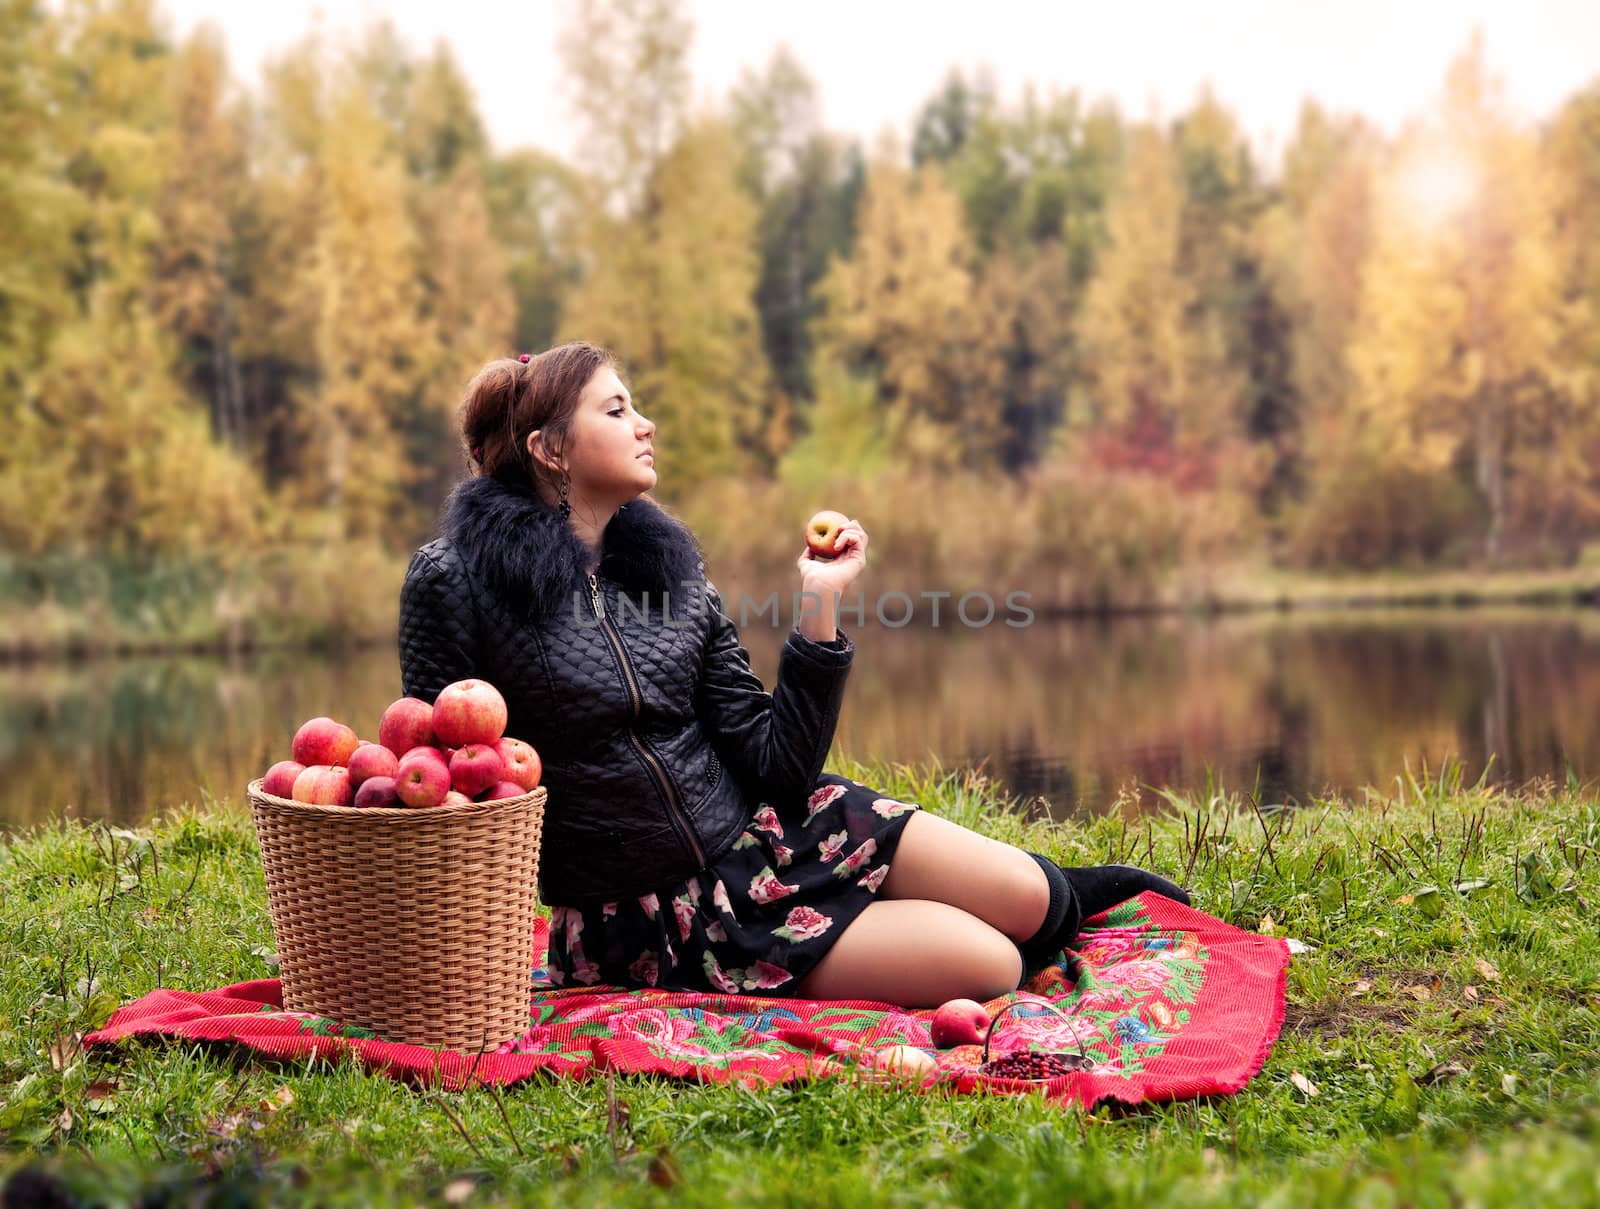 haughty woman with a basket of apples on a picnic